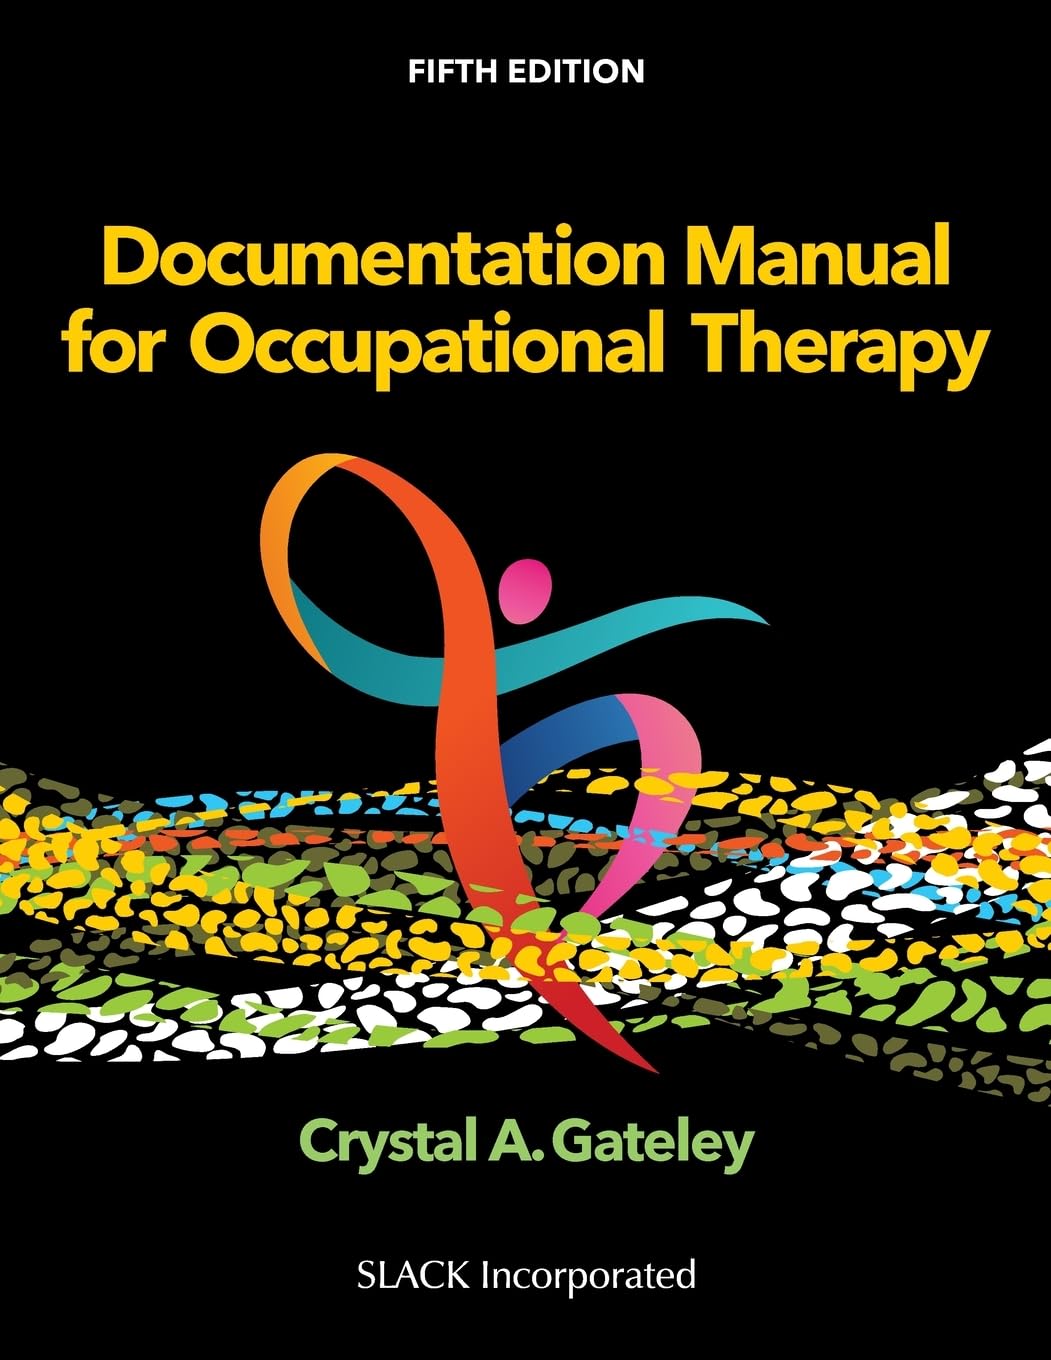 Documentation Manual for Occupational Therapy 5th ed. Edition PDF by Crystal A Gateley (Author) medicalebooks.org